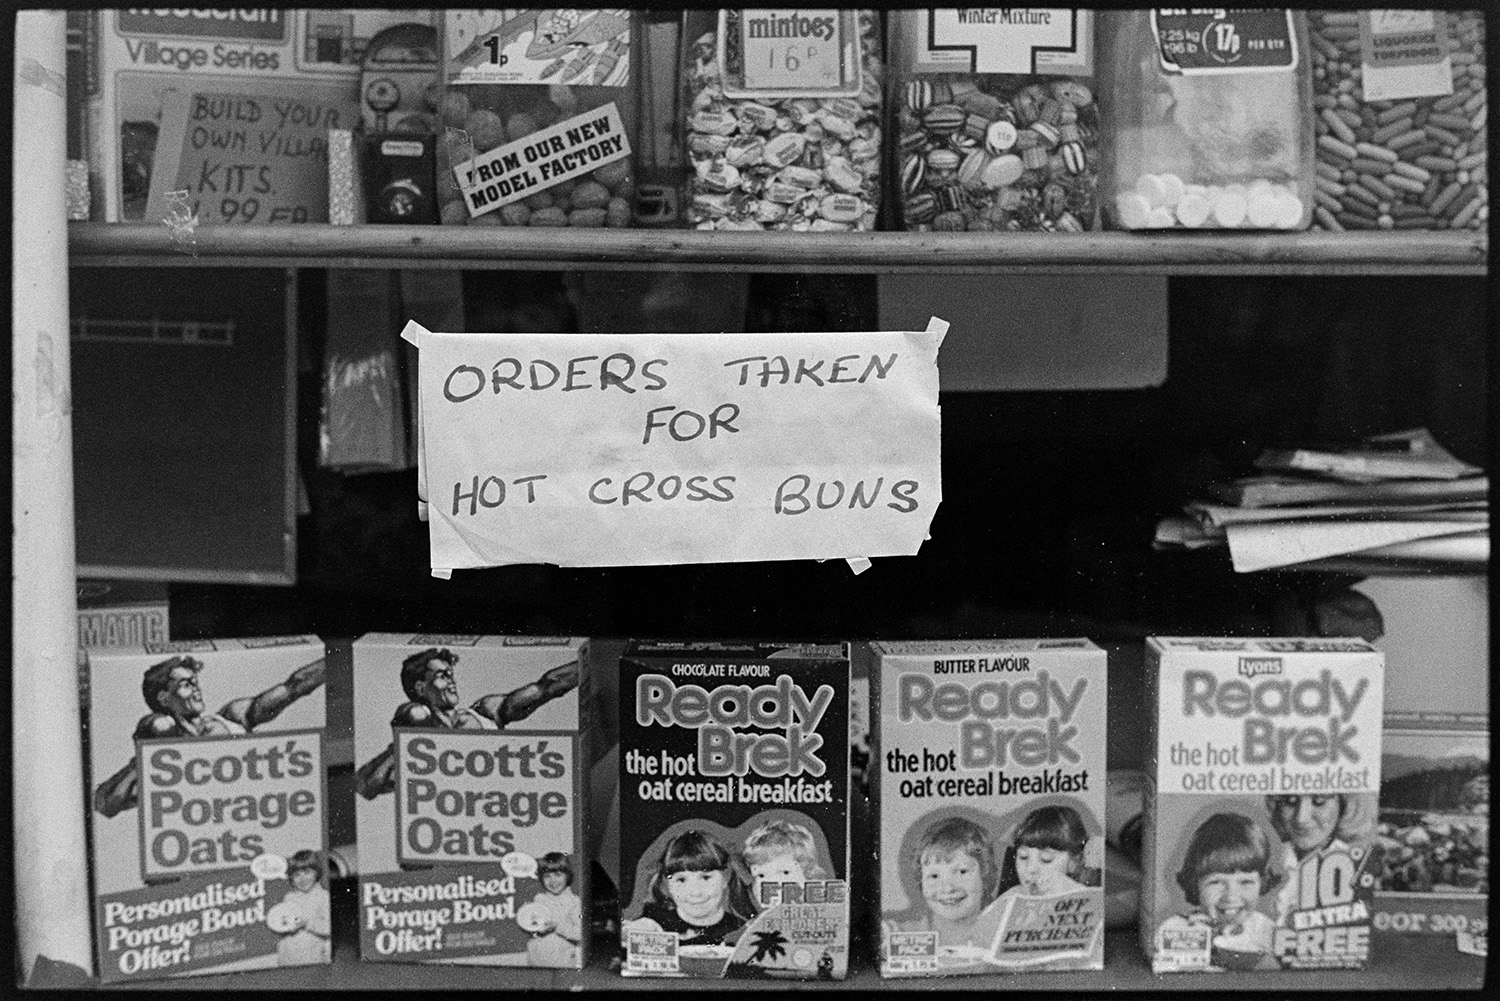 Grocery shop window with price signs and notice, hot cross buns. 
[The shop front window of London House Stores in Fore Street, Dolton. A display of sweet jars, porridge boxes and a sign reading 'Orders Taken for Hot Cross Buns' are visible.]